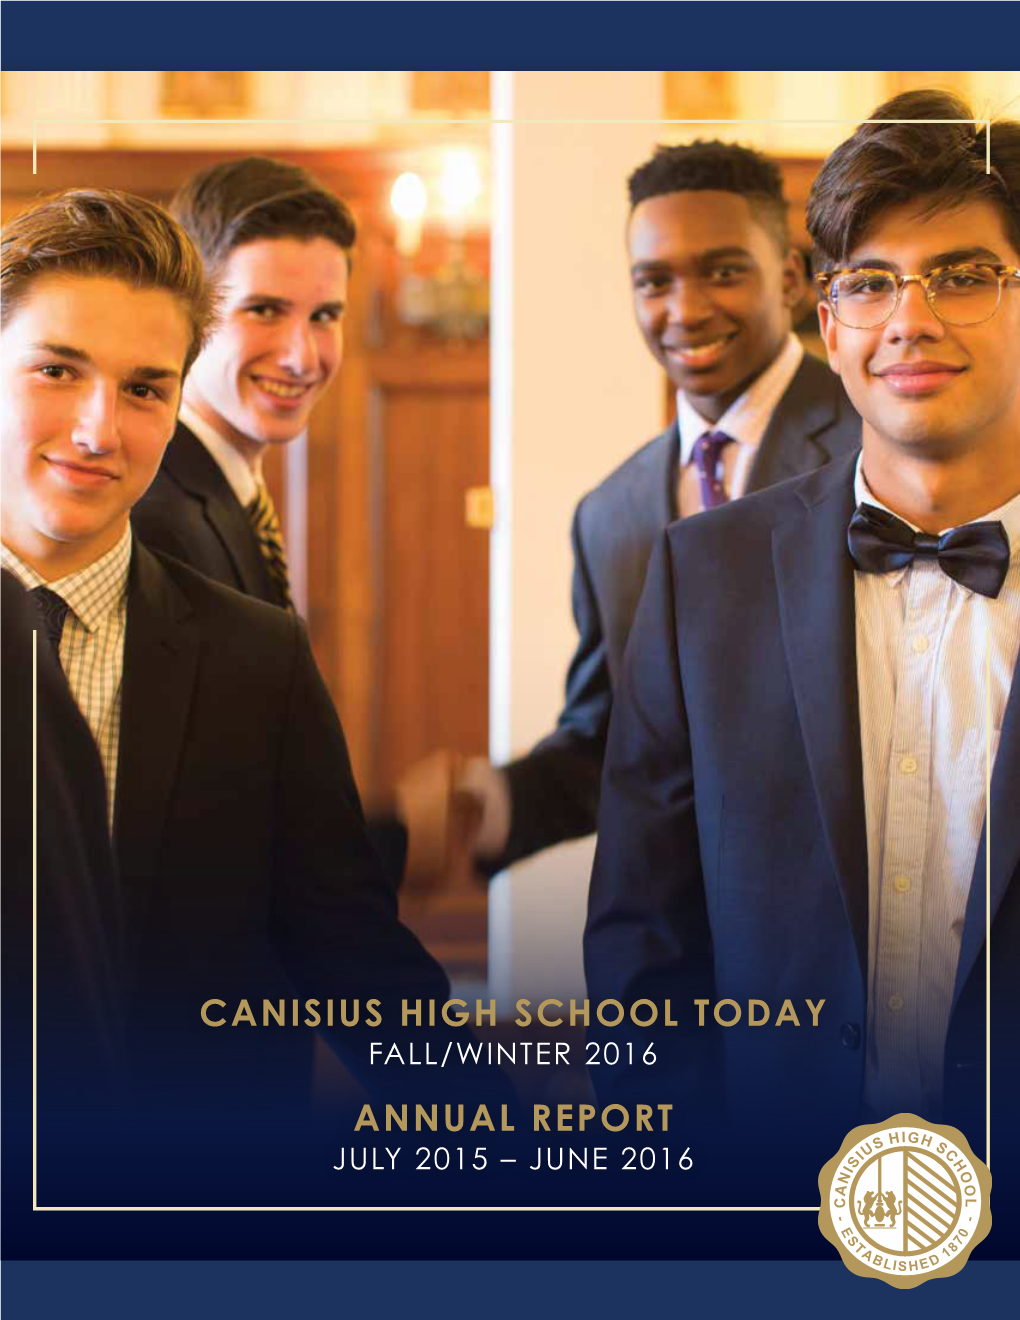 Canisius High School Today Annual Report